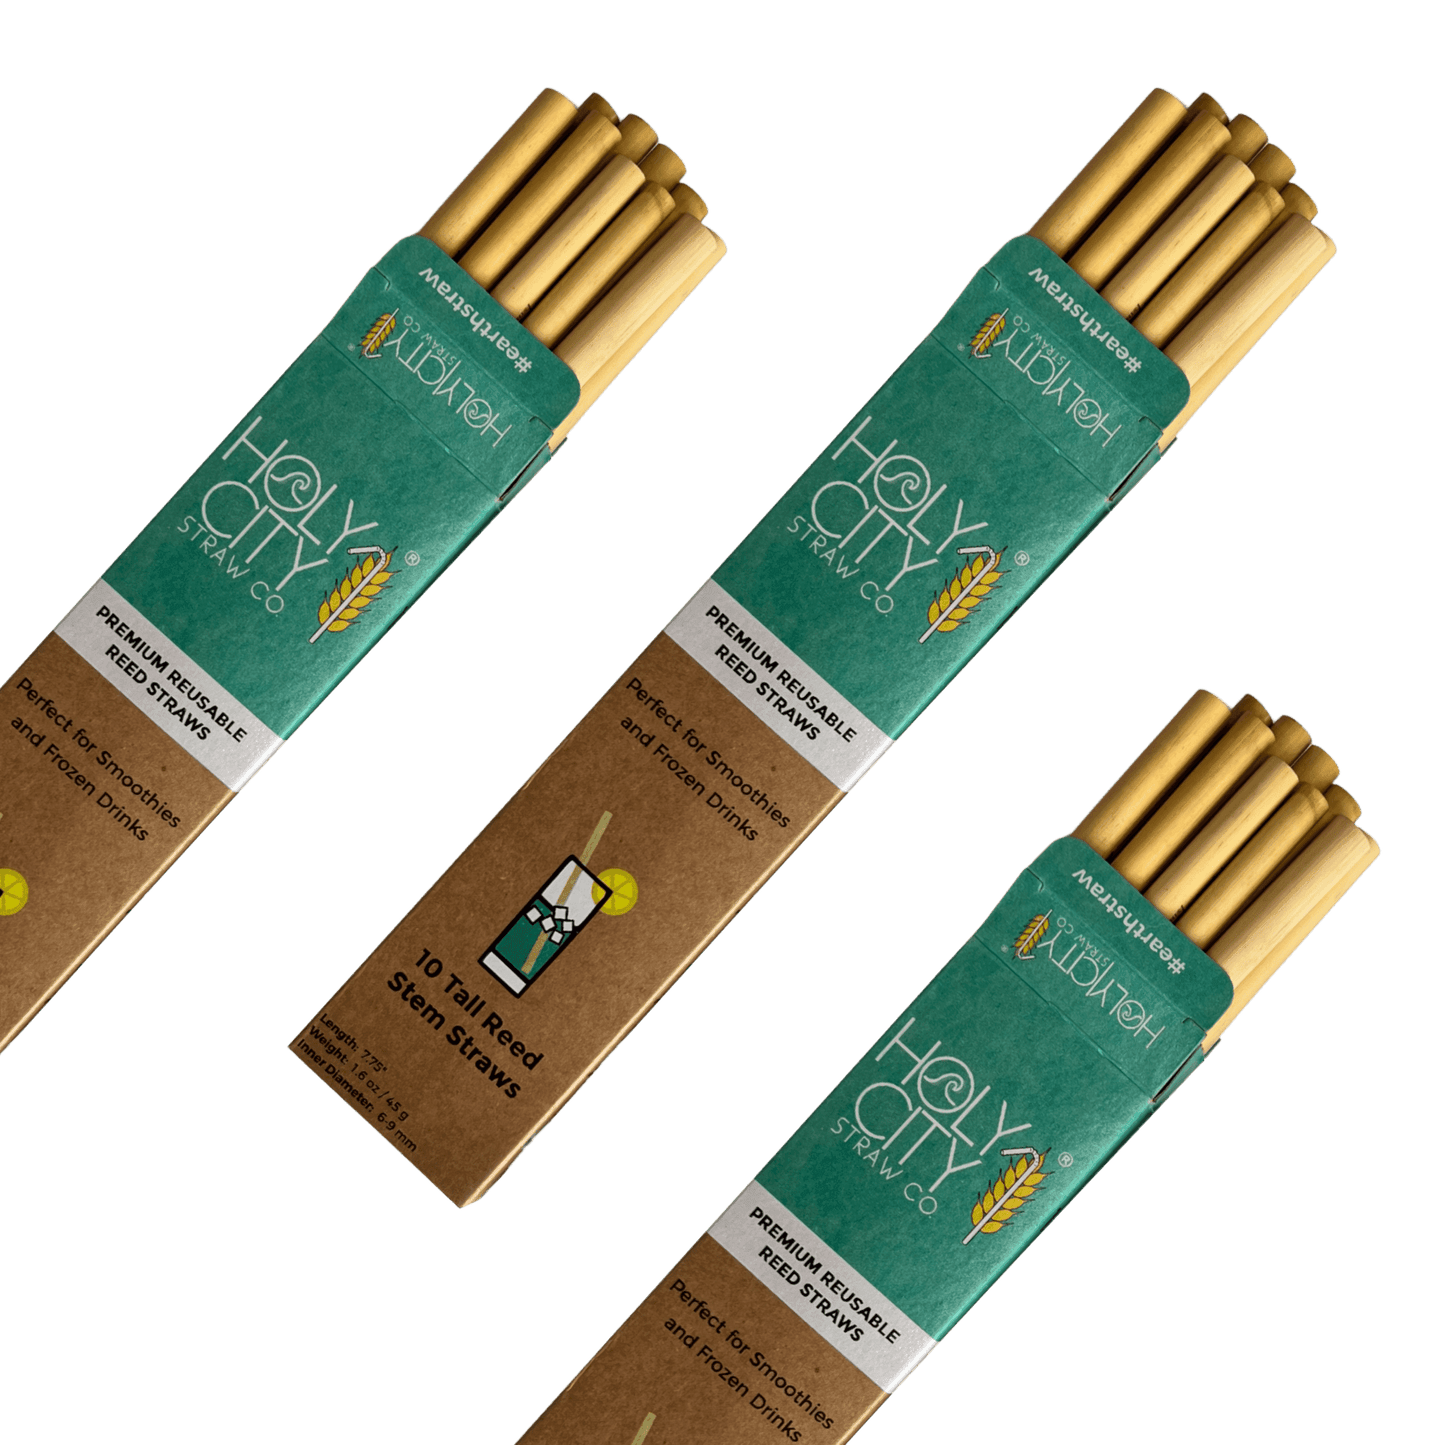 Holy City Straw Tall Reusable Reed Straw Bundle - 3 Pack